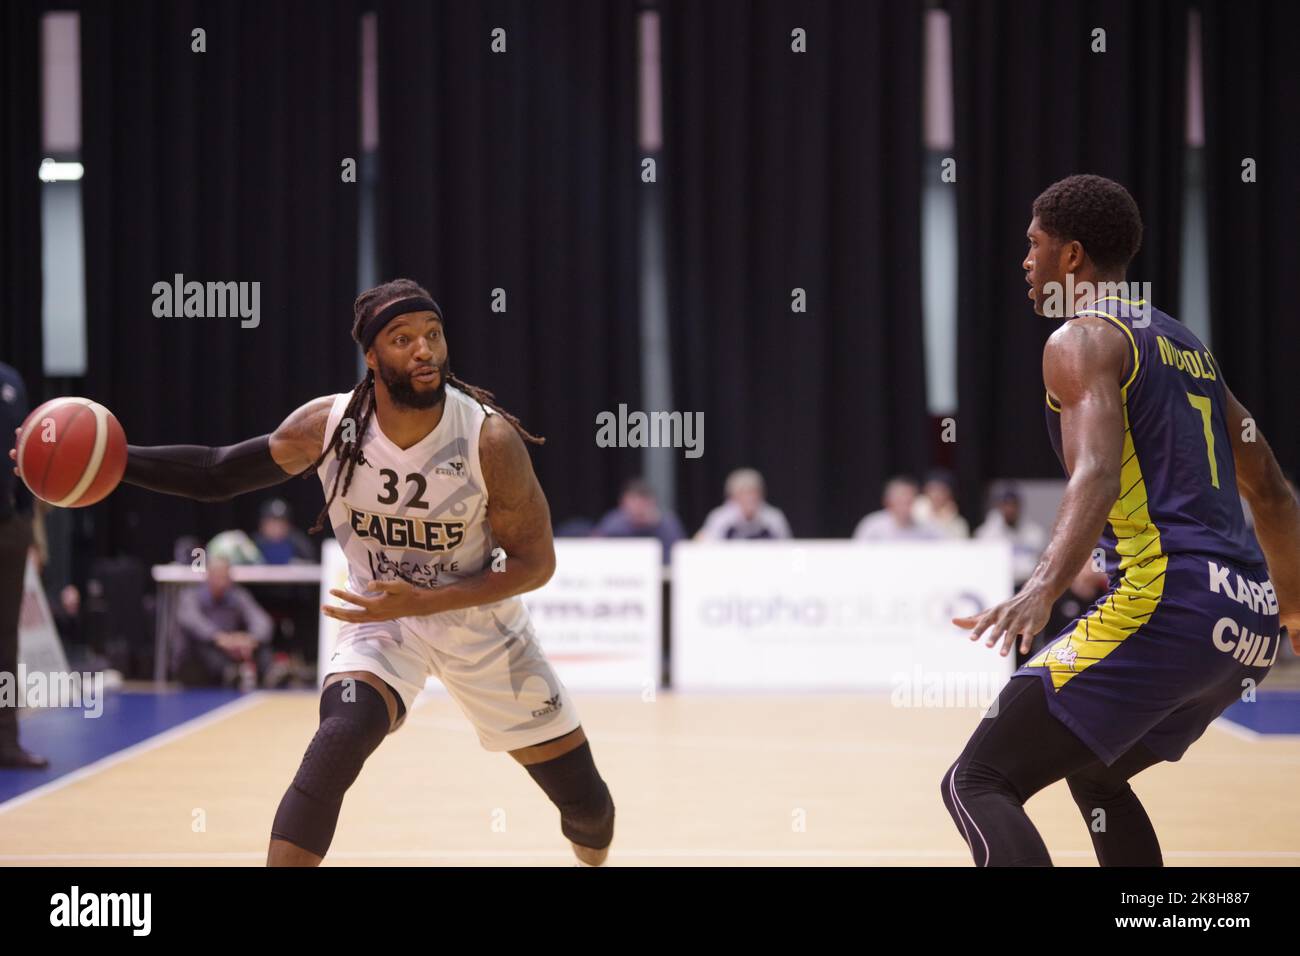 Sheffield, England, 23 October 2022. Donovan Johnson playing for Newcastle Eagles against B. Braun Sheffield Sharks in a BBL match at Ponds Forge. Kipper Nichols is playing for Sheffield. Credit: Colin Edwards/Alamy Live News. Stock Photo